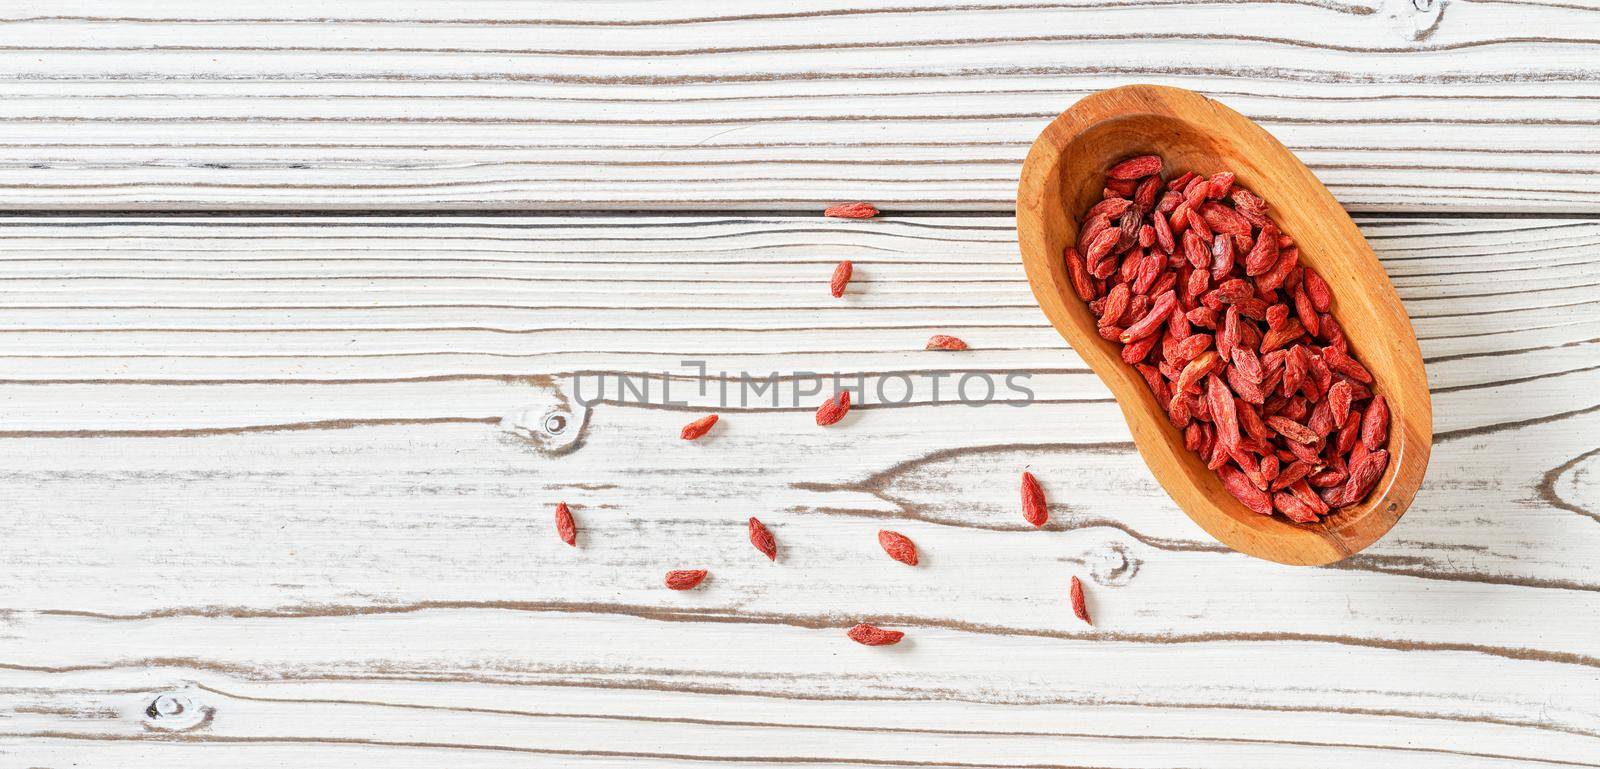 Dried goji aka. wolfberry seeds in wooden bowl and spilled on white boards desk near, view from above by Ivanko